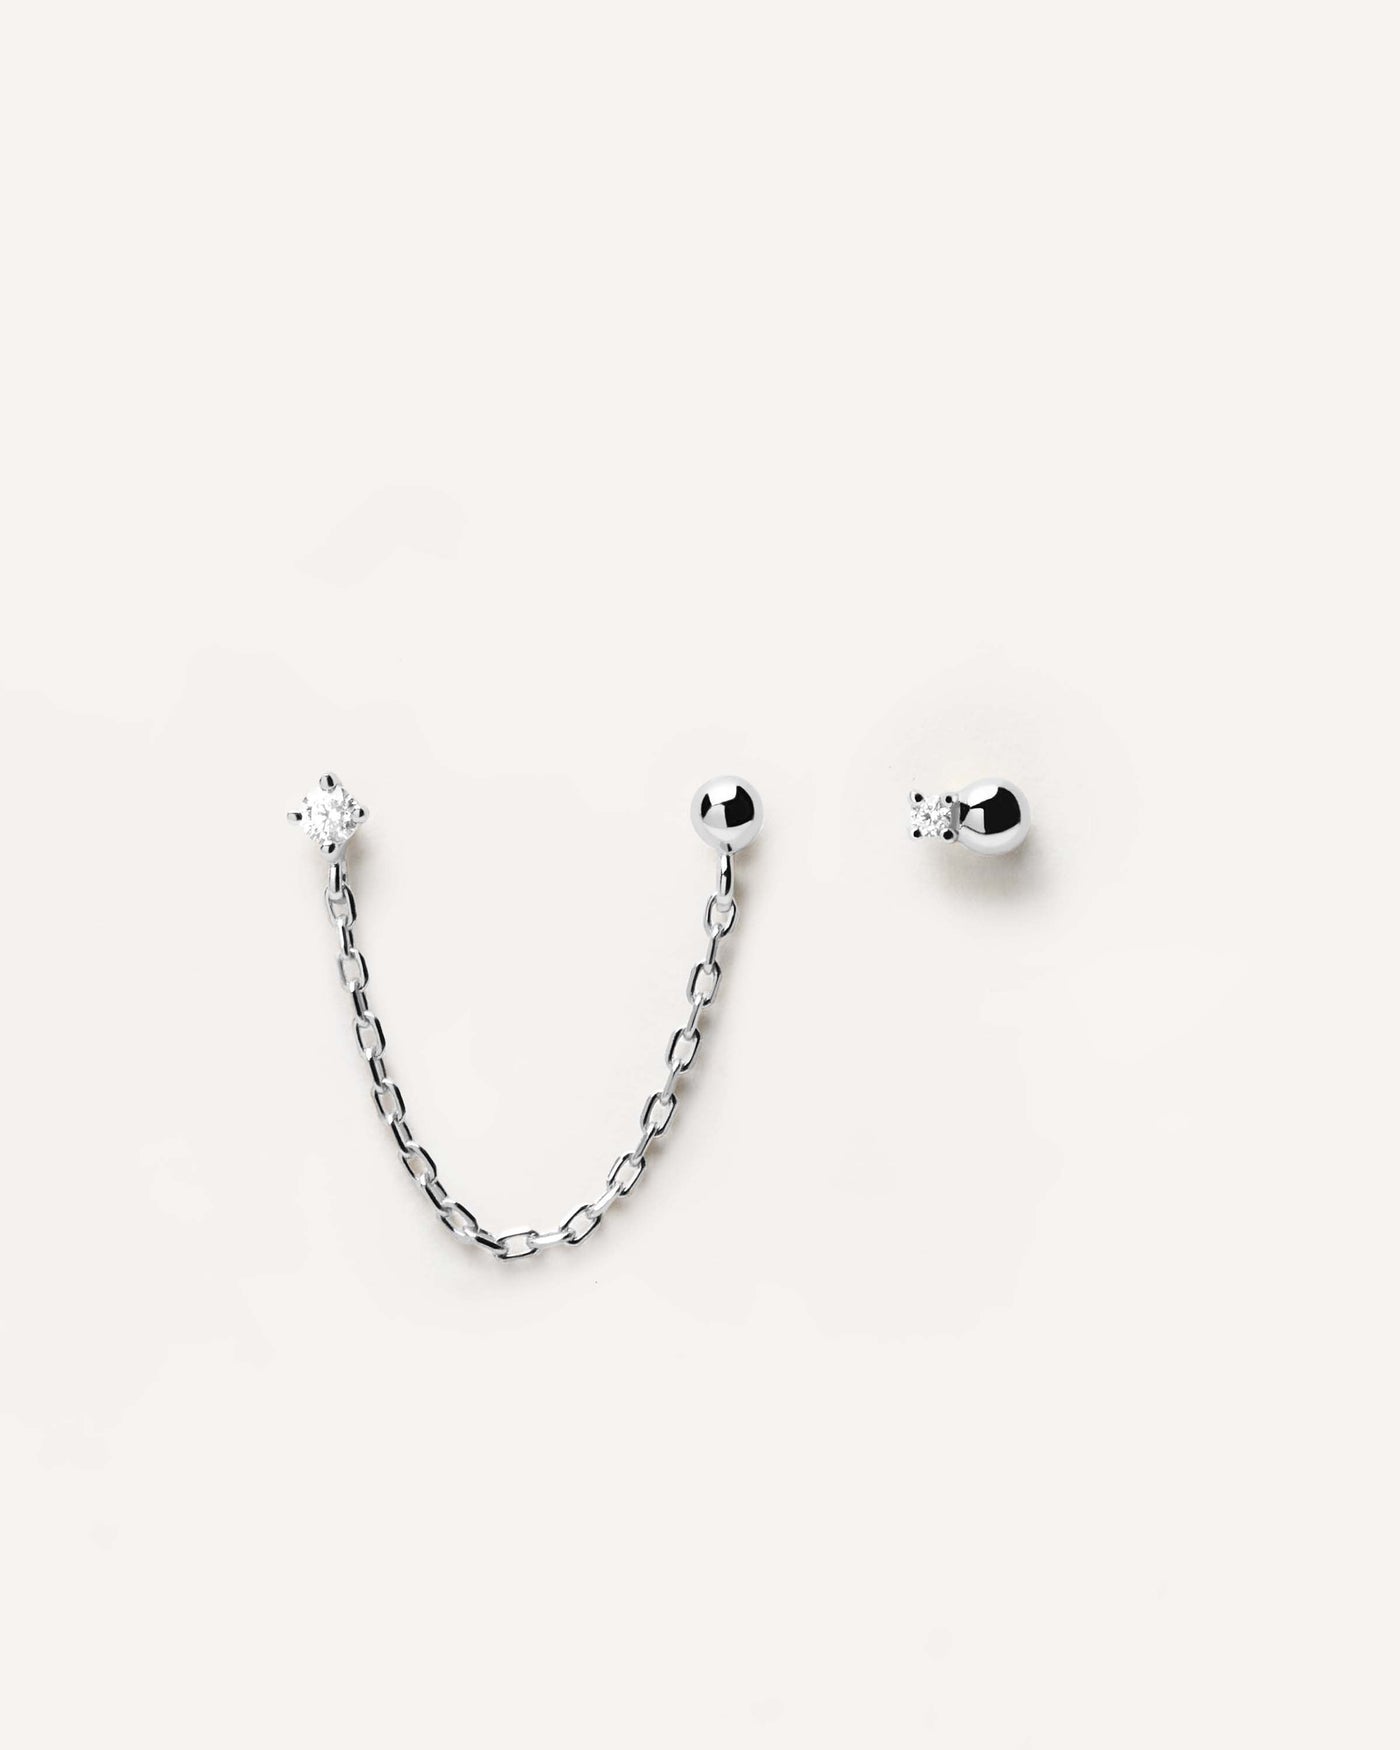 2023 Selection | Musketeer Silver Earrings. Chain linked and single 925 sterling silver studs set with two white zirconia stones. Get the latest arrival from PDPAOLA. Place your order safely and get this Best Seller. Free Shipping.